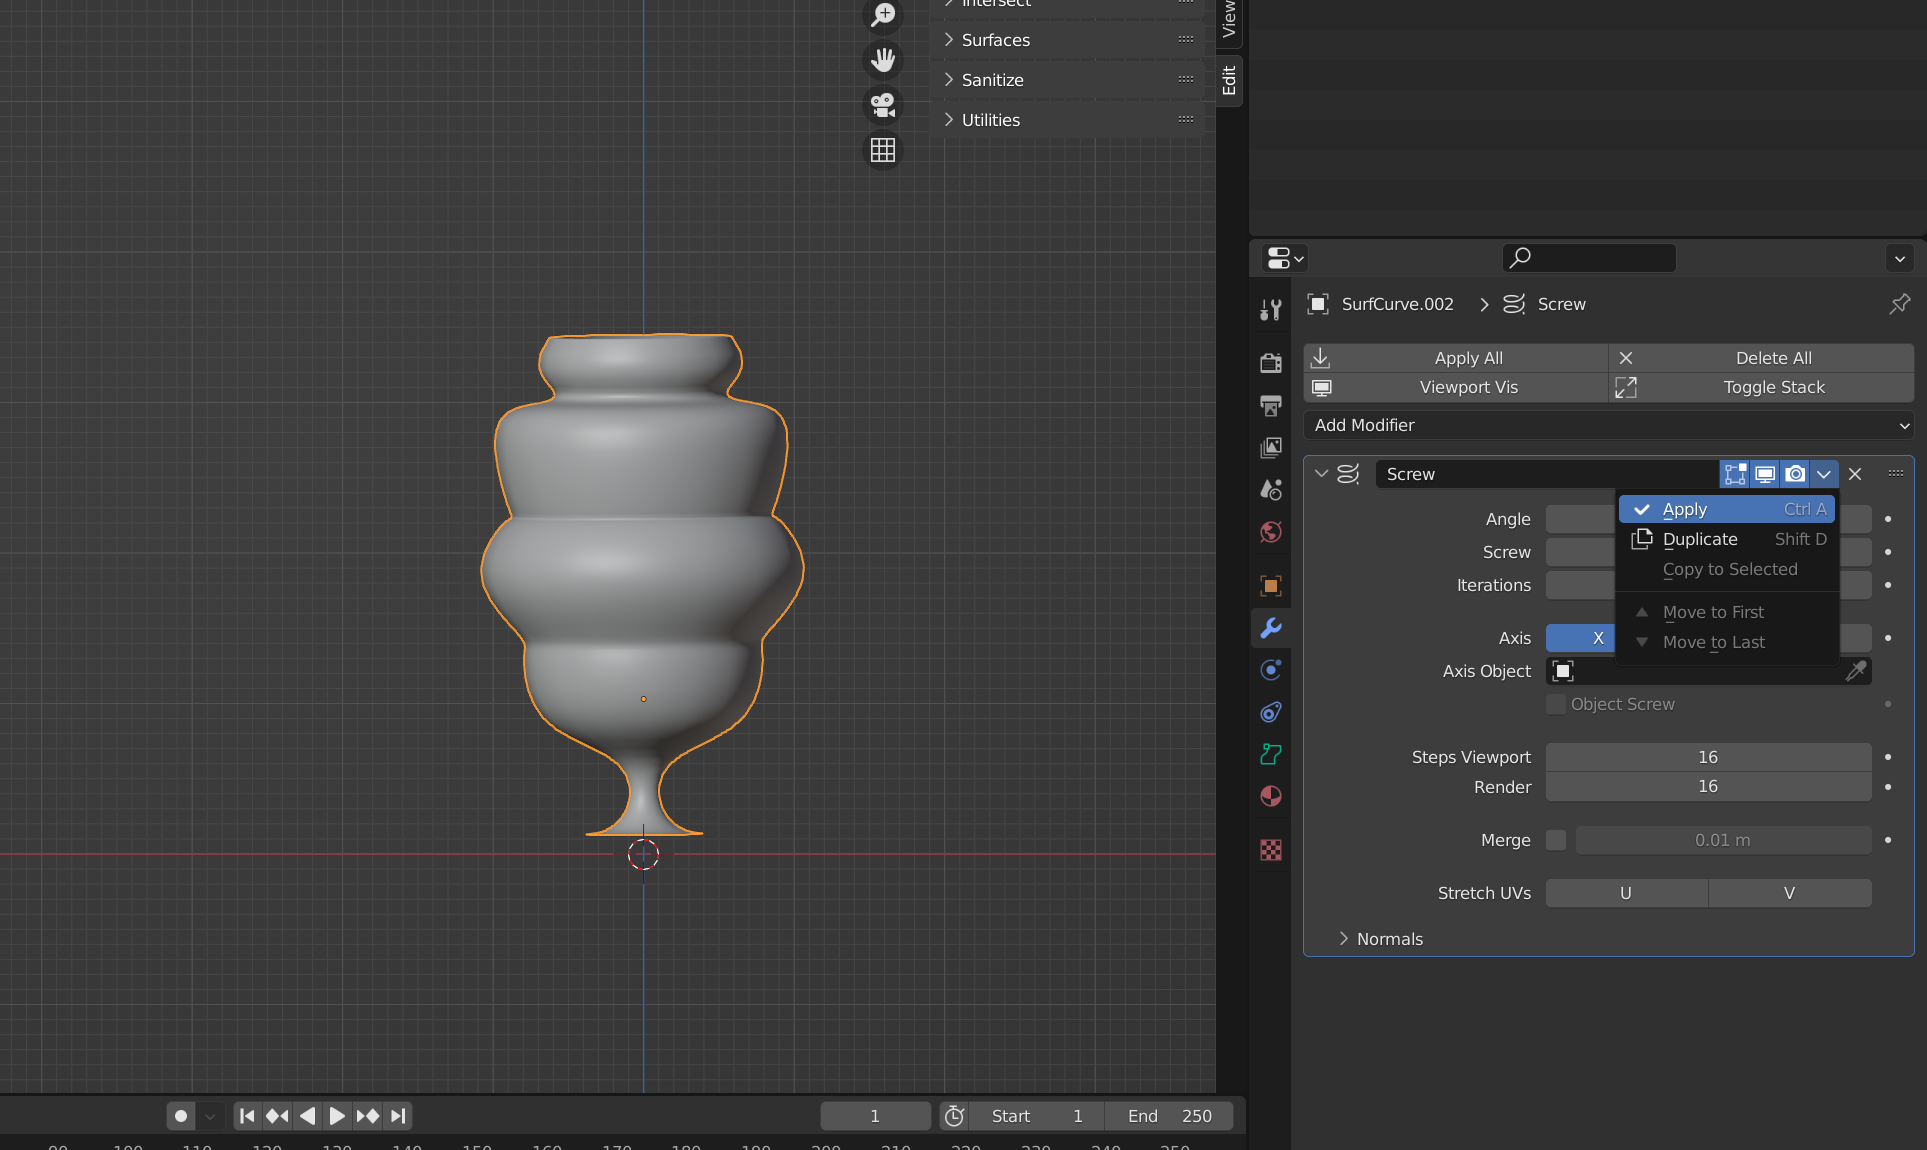 Creating the world's ugliest vase with the Screw Modifier.